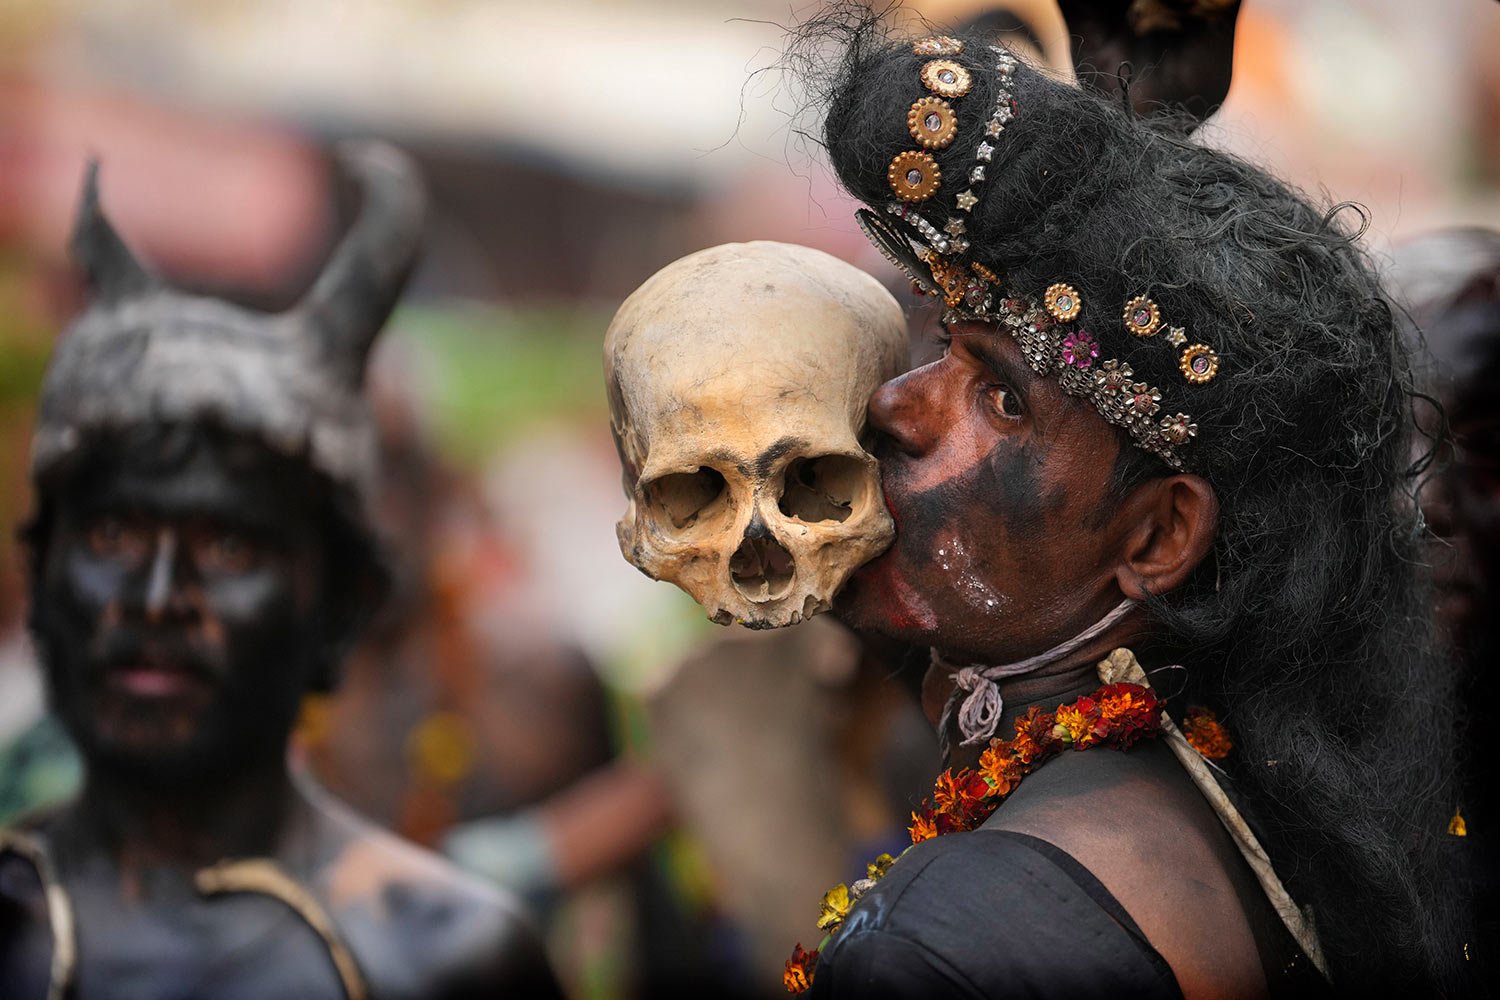  A Hindu devotee of Lord Shiva holds a human skull with his teeth as he takes part in a religious procession on the occasion of the Maha Shivratri festival in Prayagraj, in the northern Indian state of Uttar Pradesh, Saturday, Feb. 18, 2023. (AP Phot